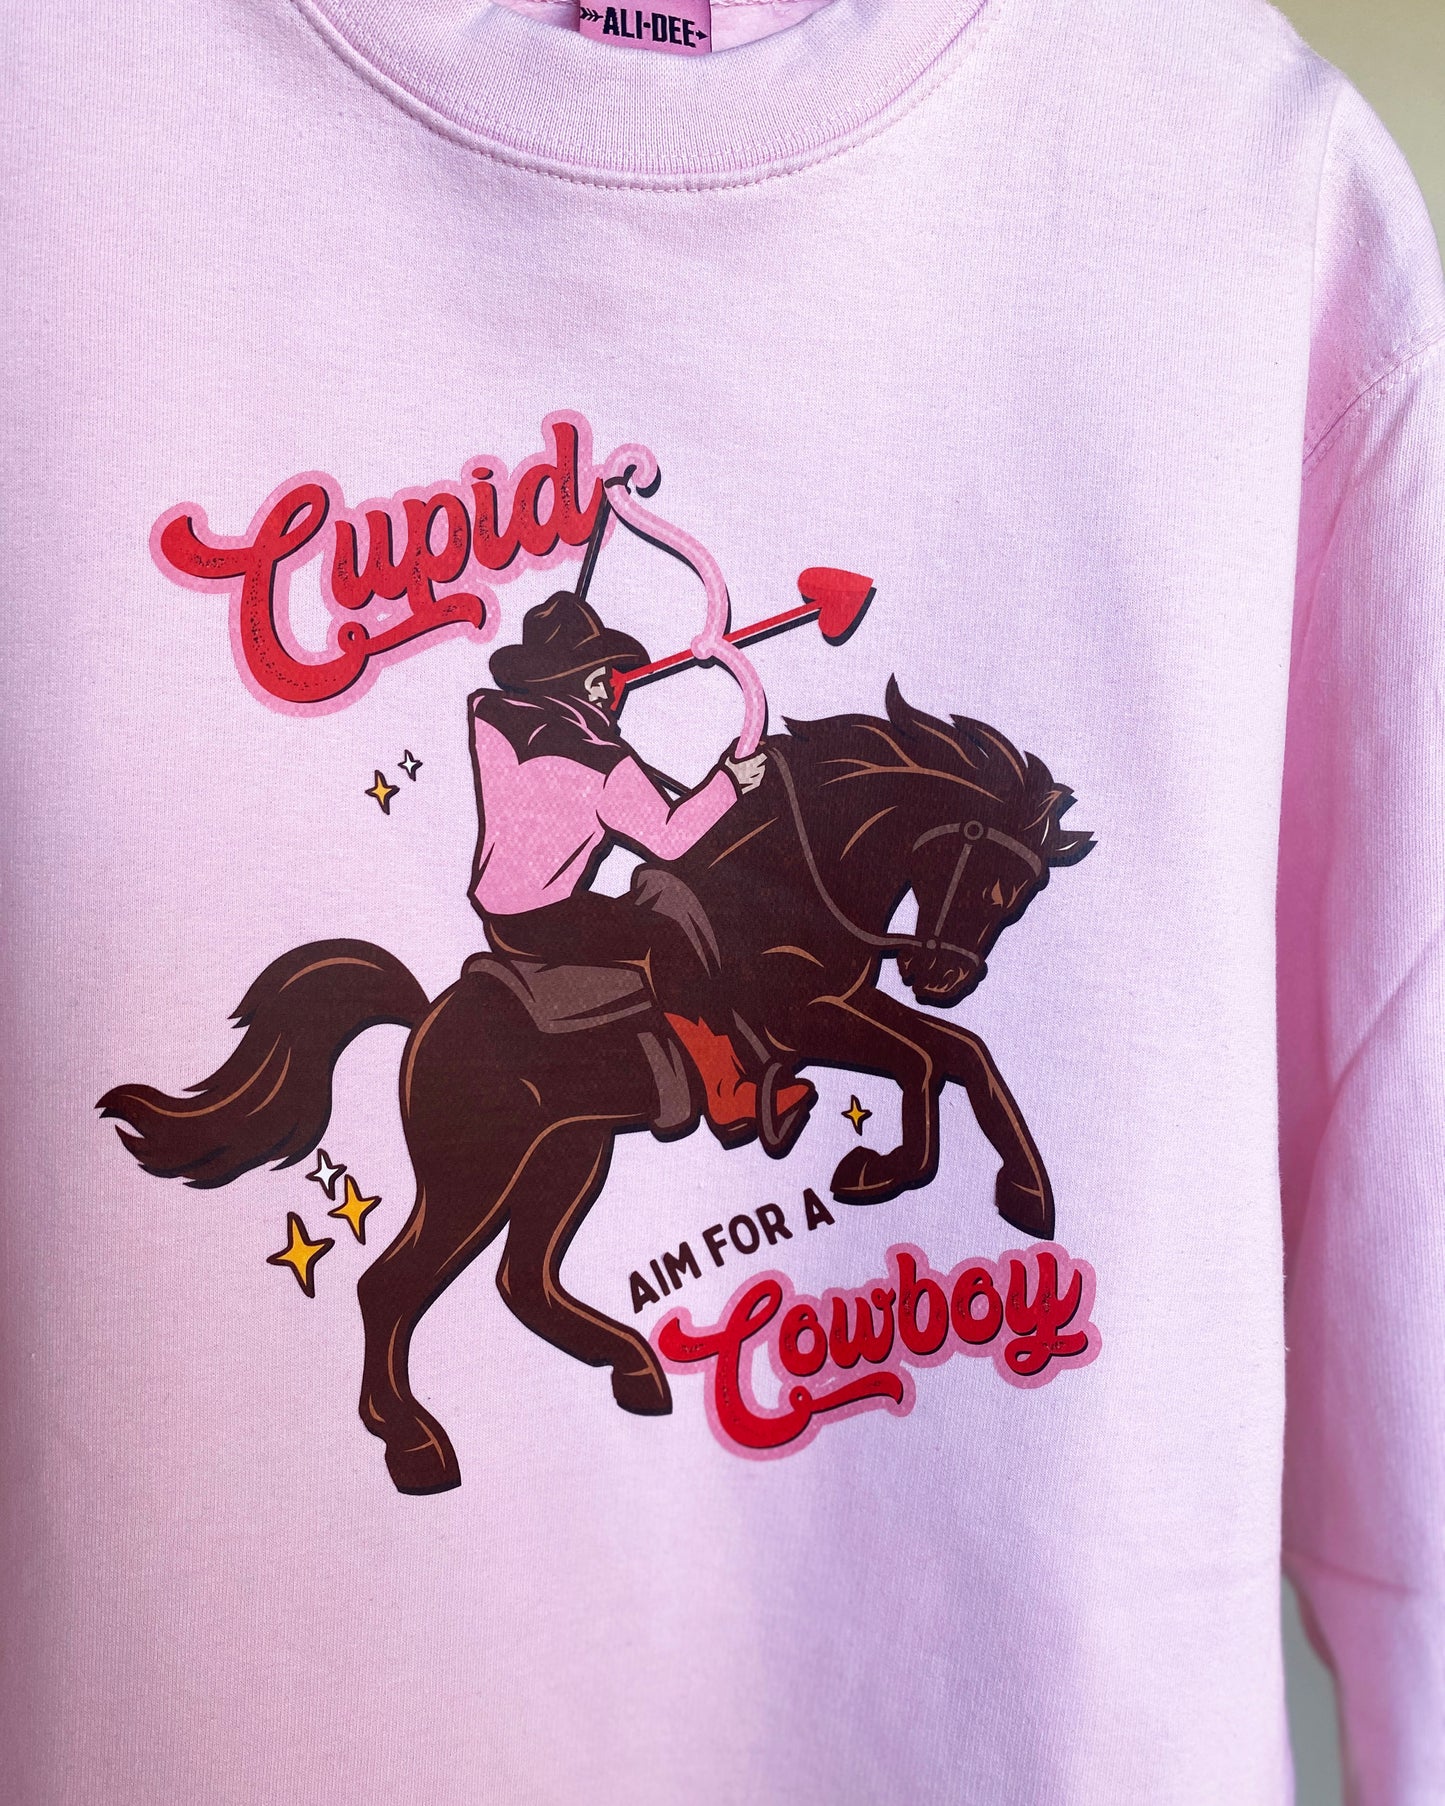 Cupid Aim for A Cowboy Valentines Day Graphic Sweatshirt - Pink